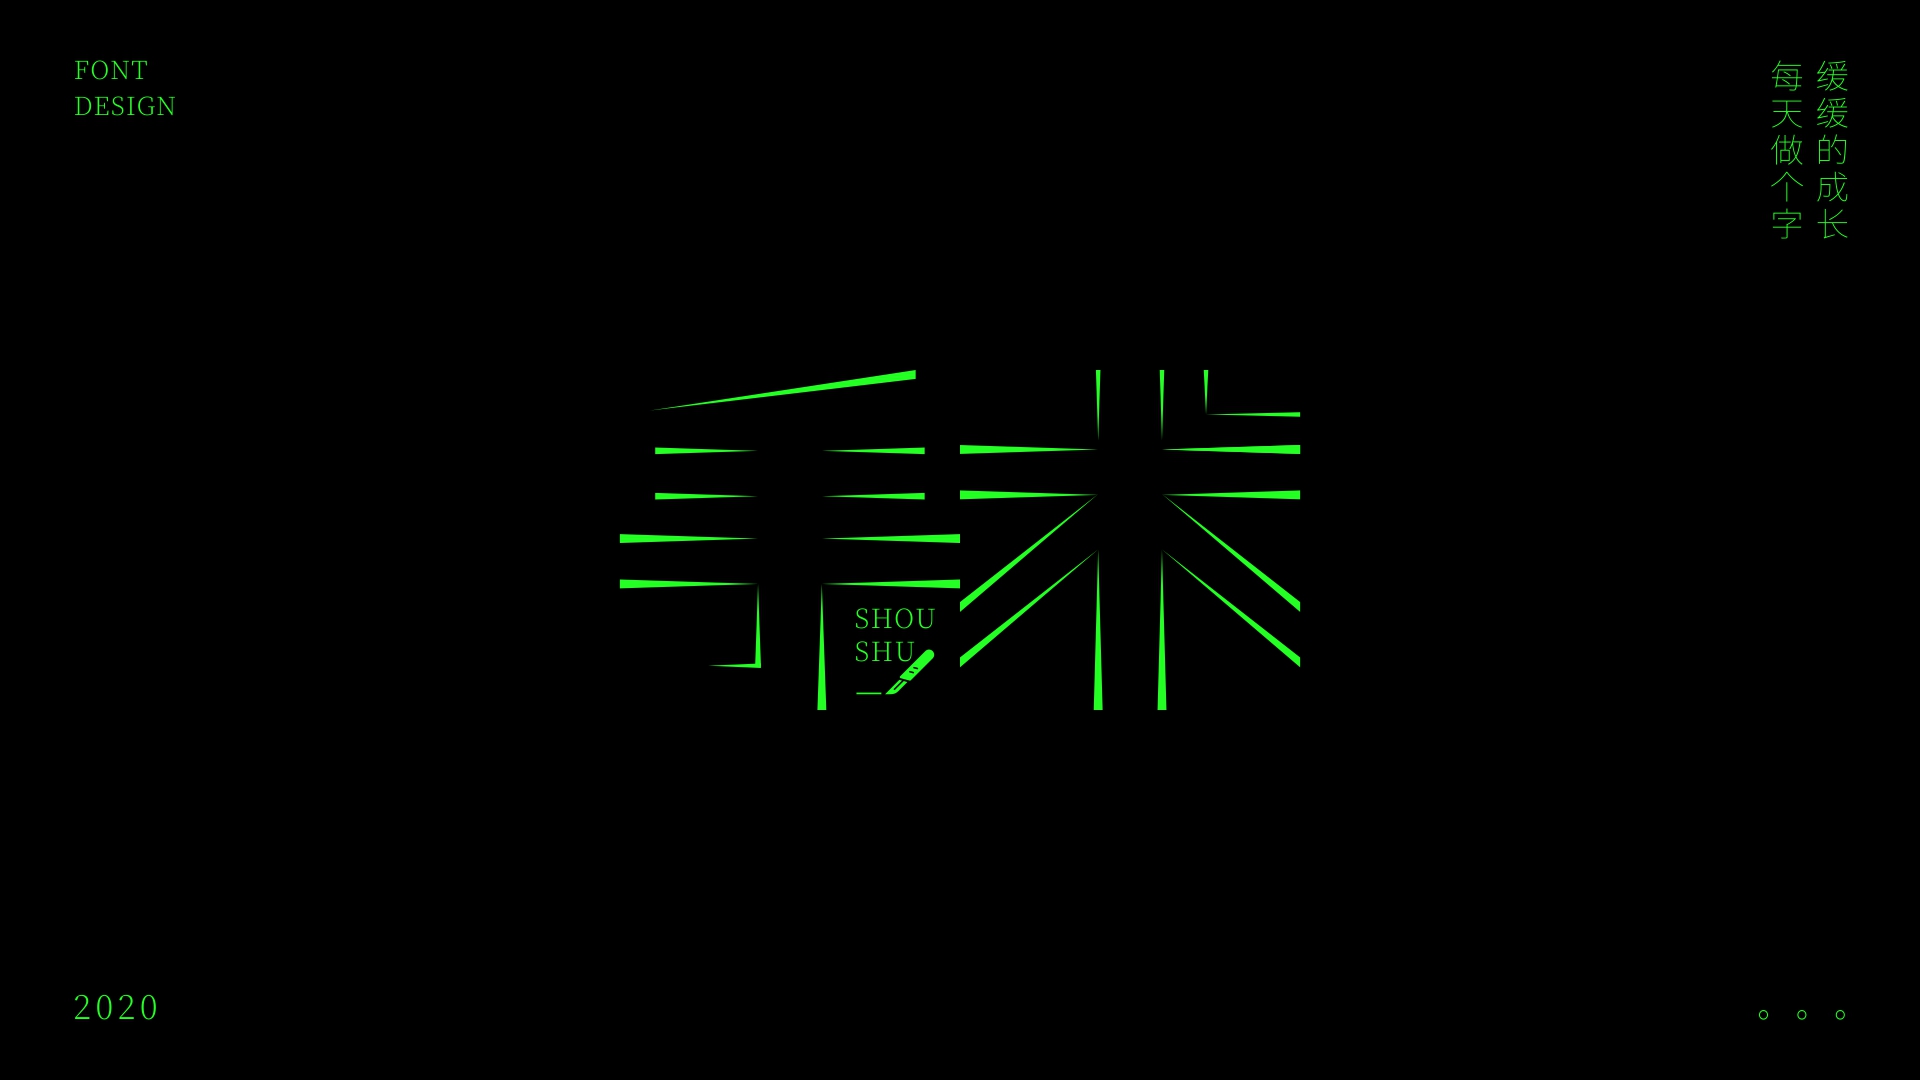 Font design of healing system based on green style